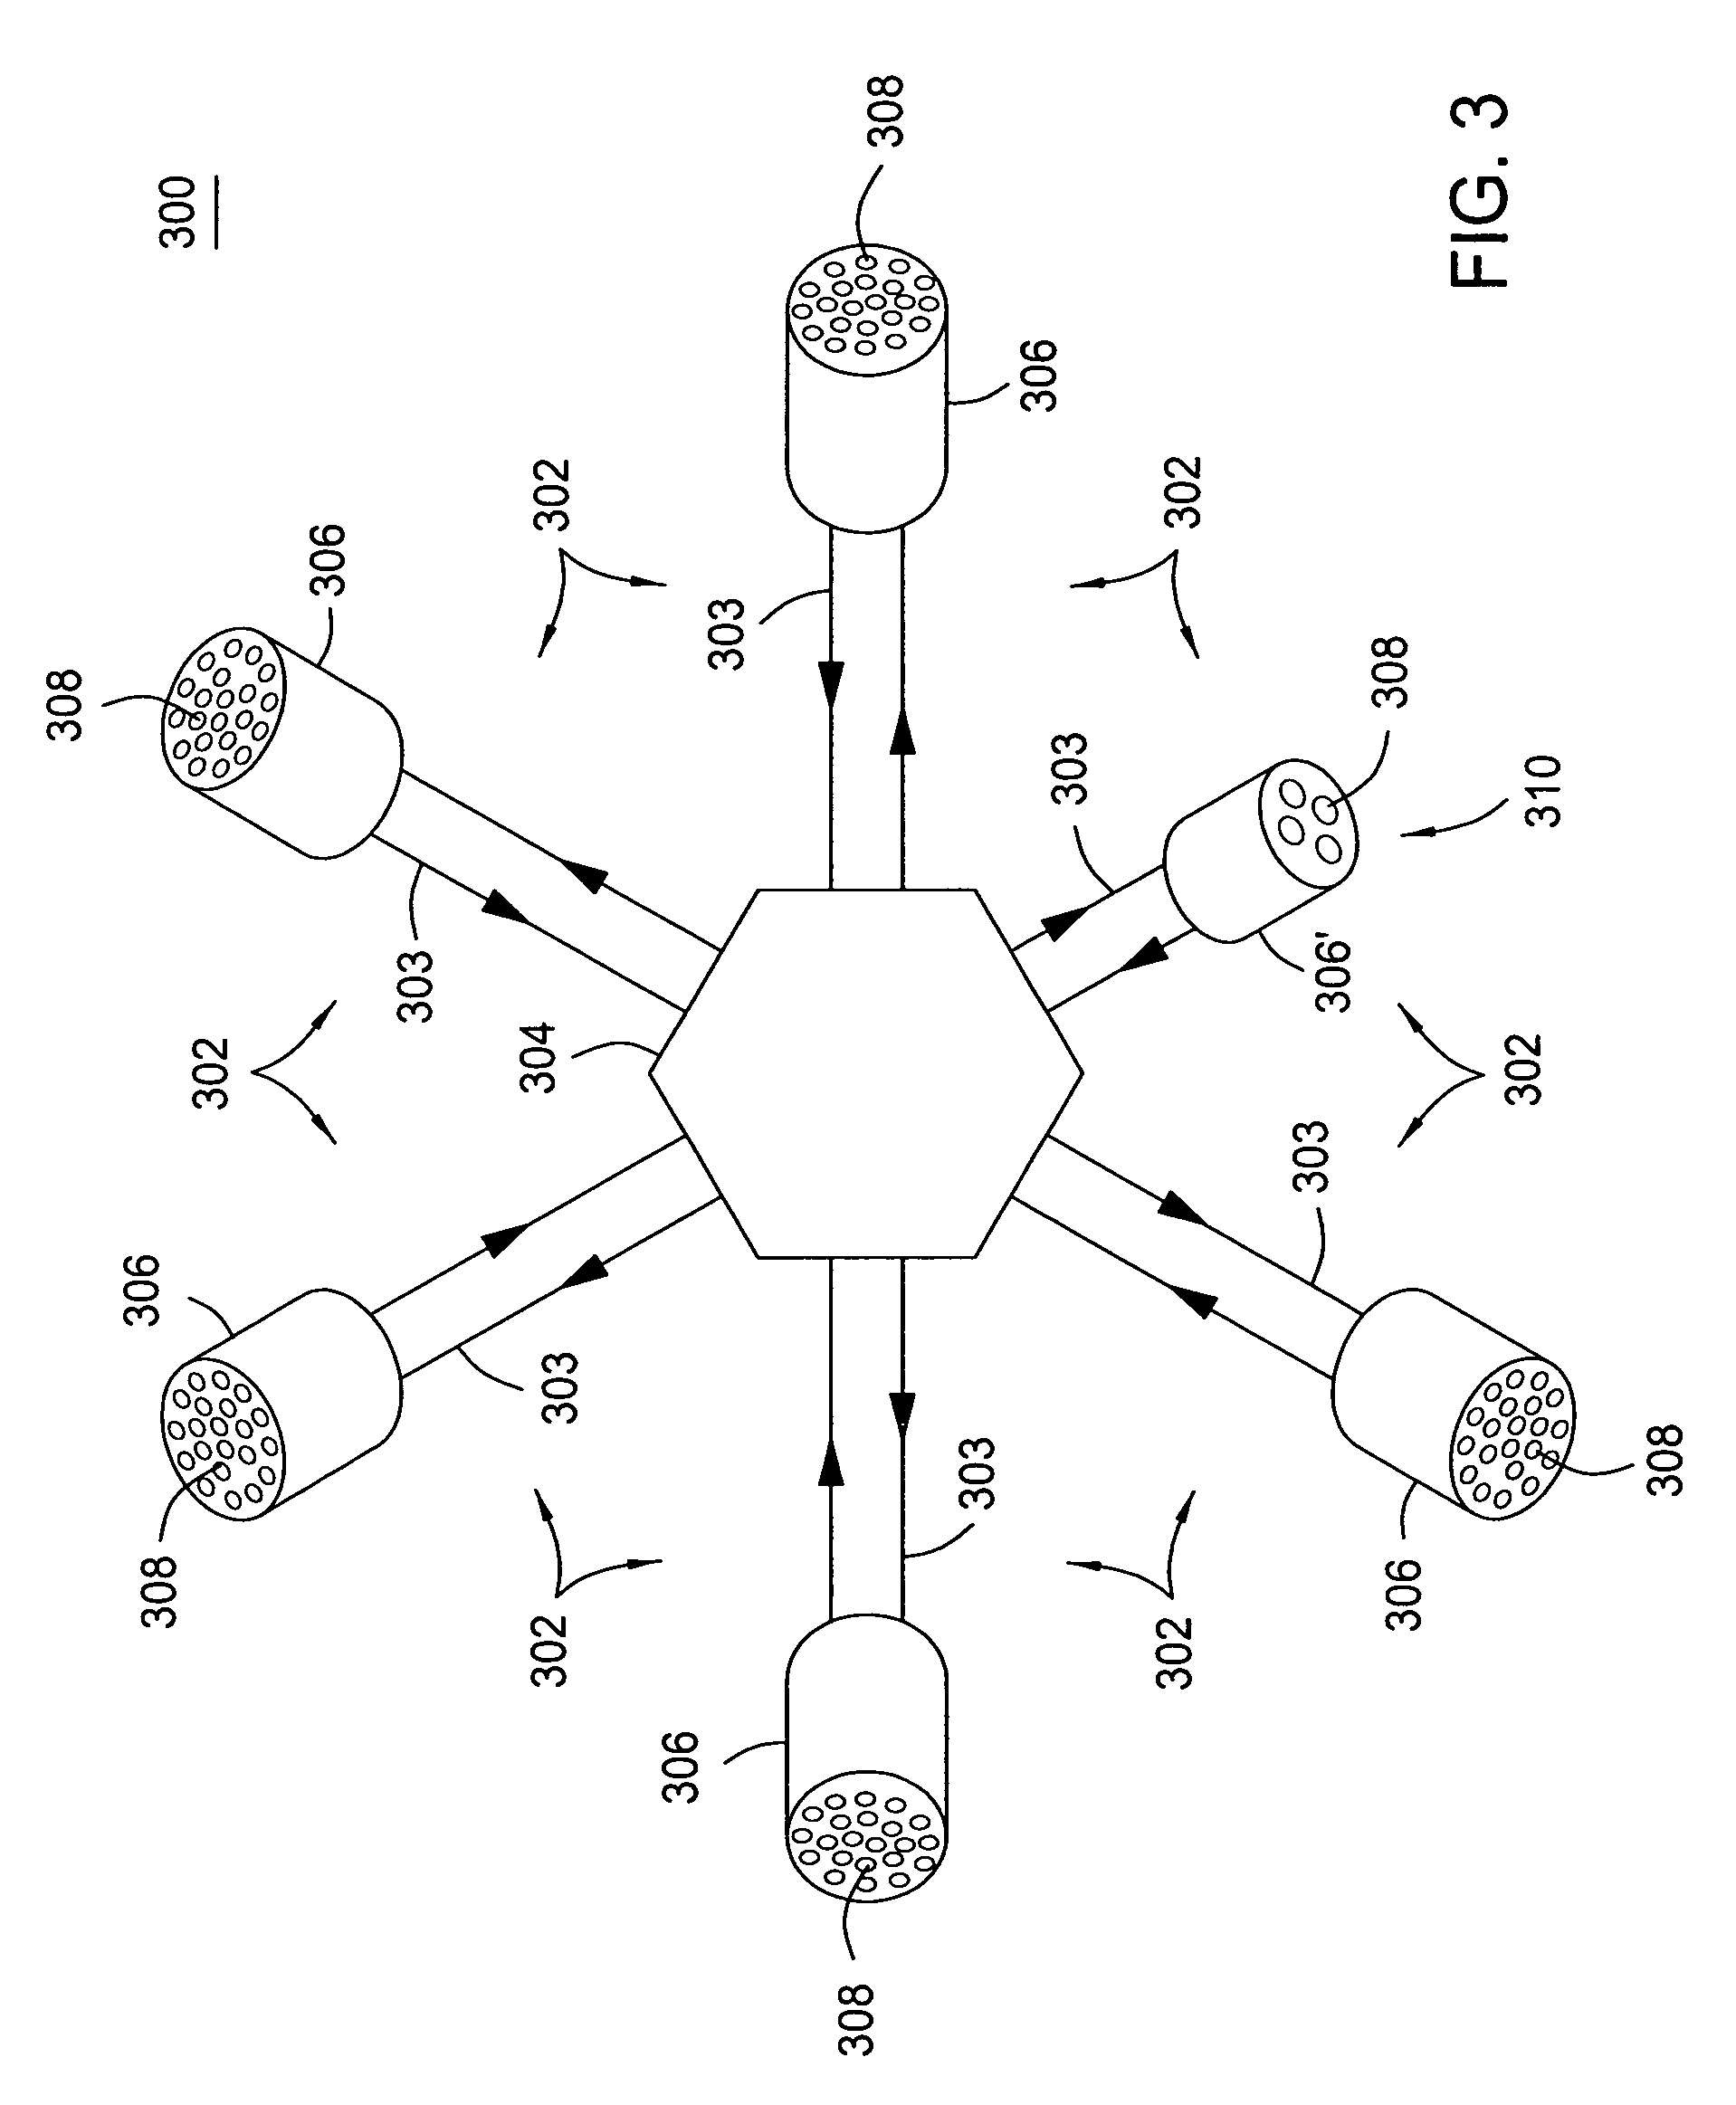 Optical harness assembly and method